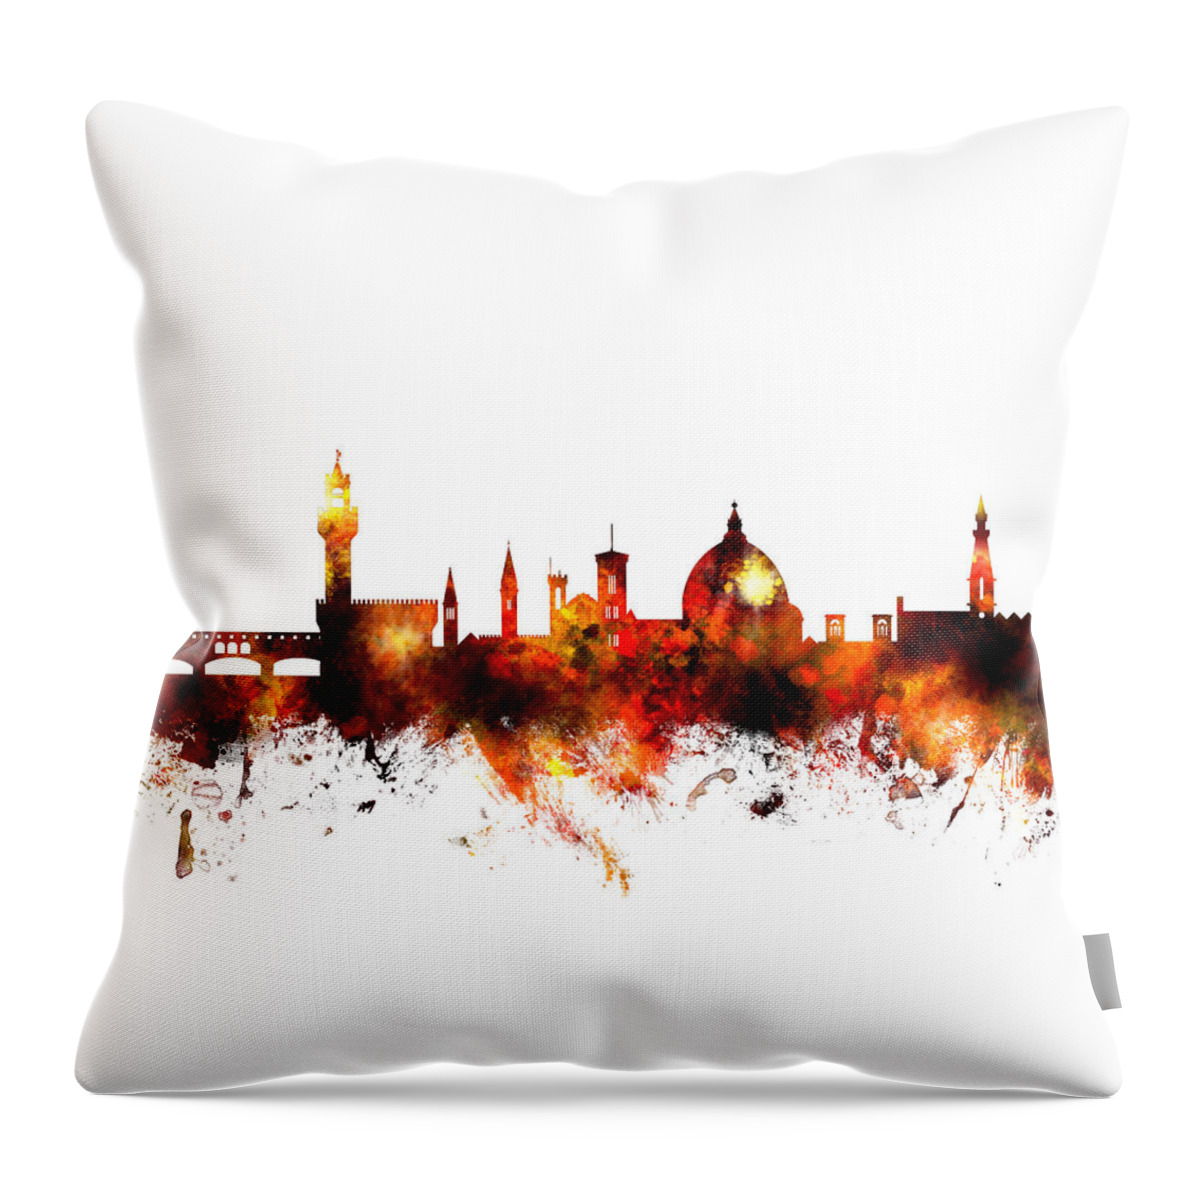 Italy Throw Pillow featuring the digital art Florence Italy Skyline #6 by Michael Tompsett